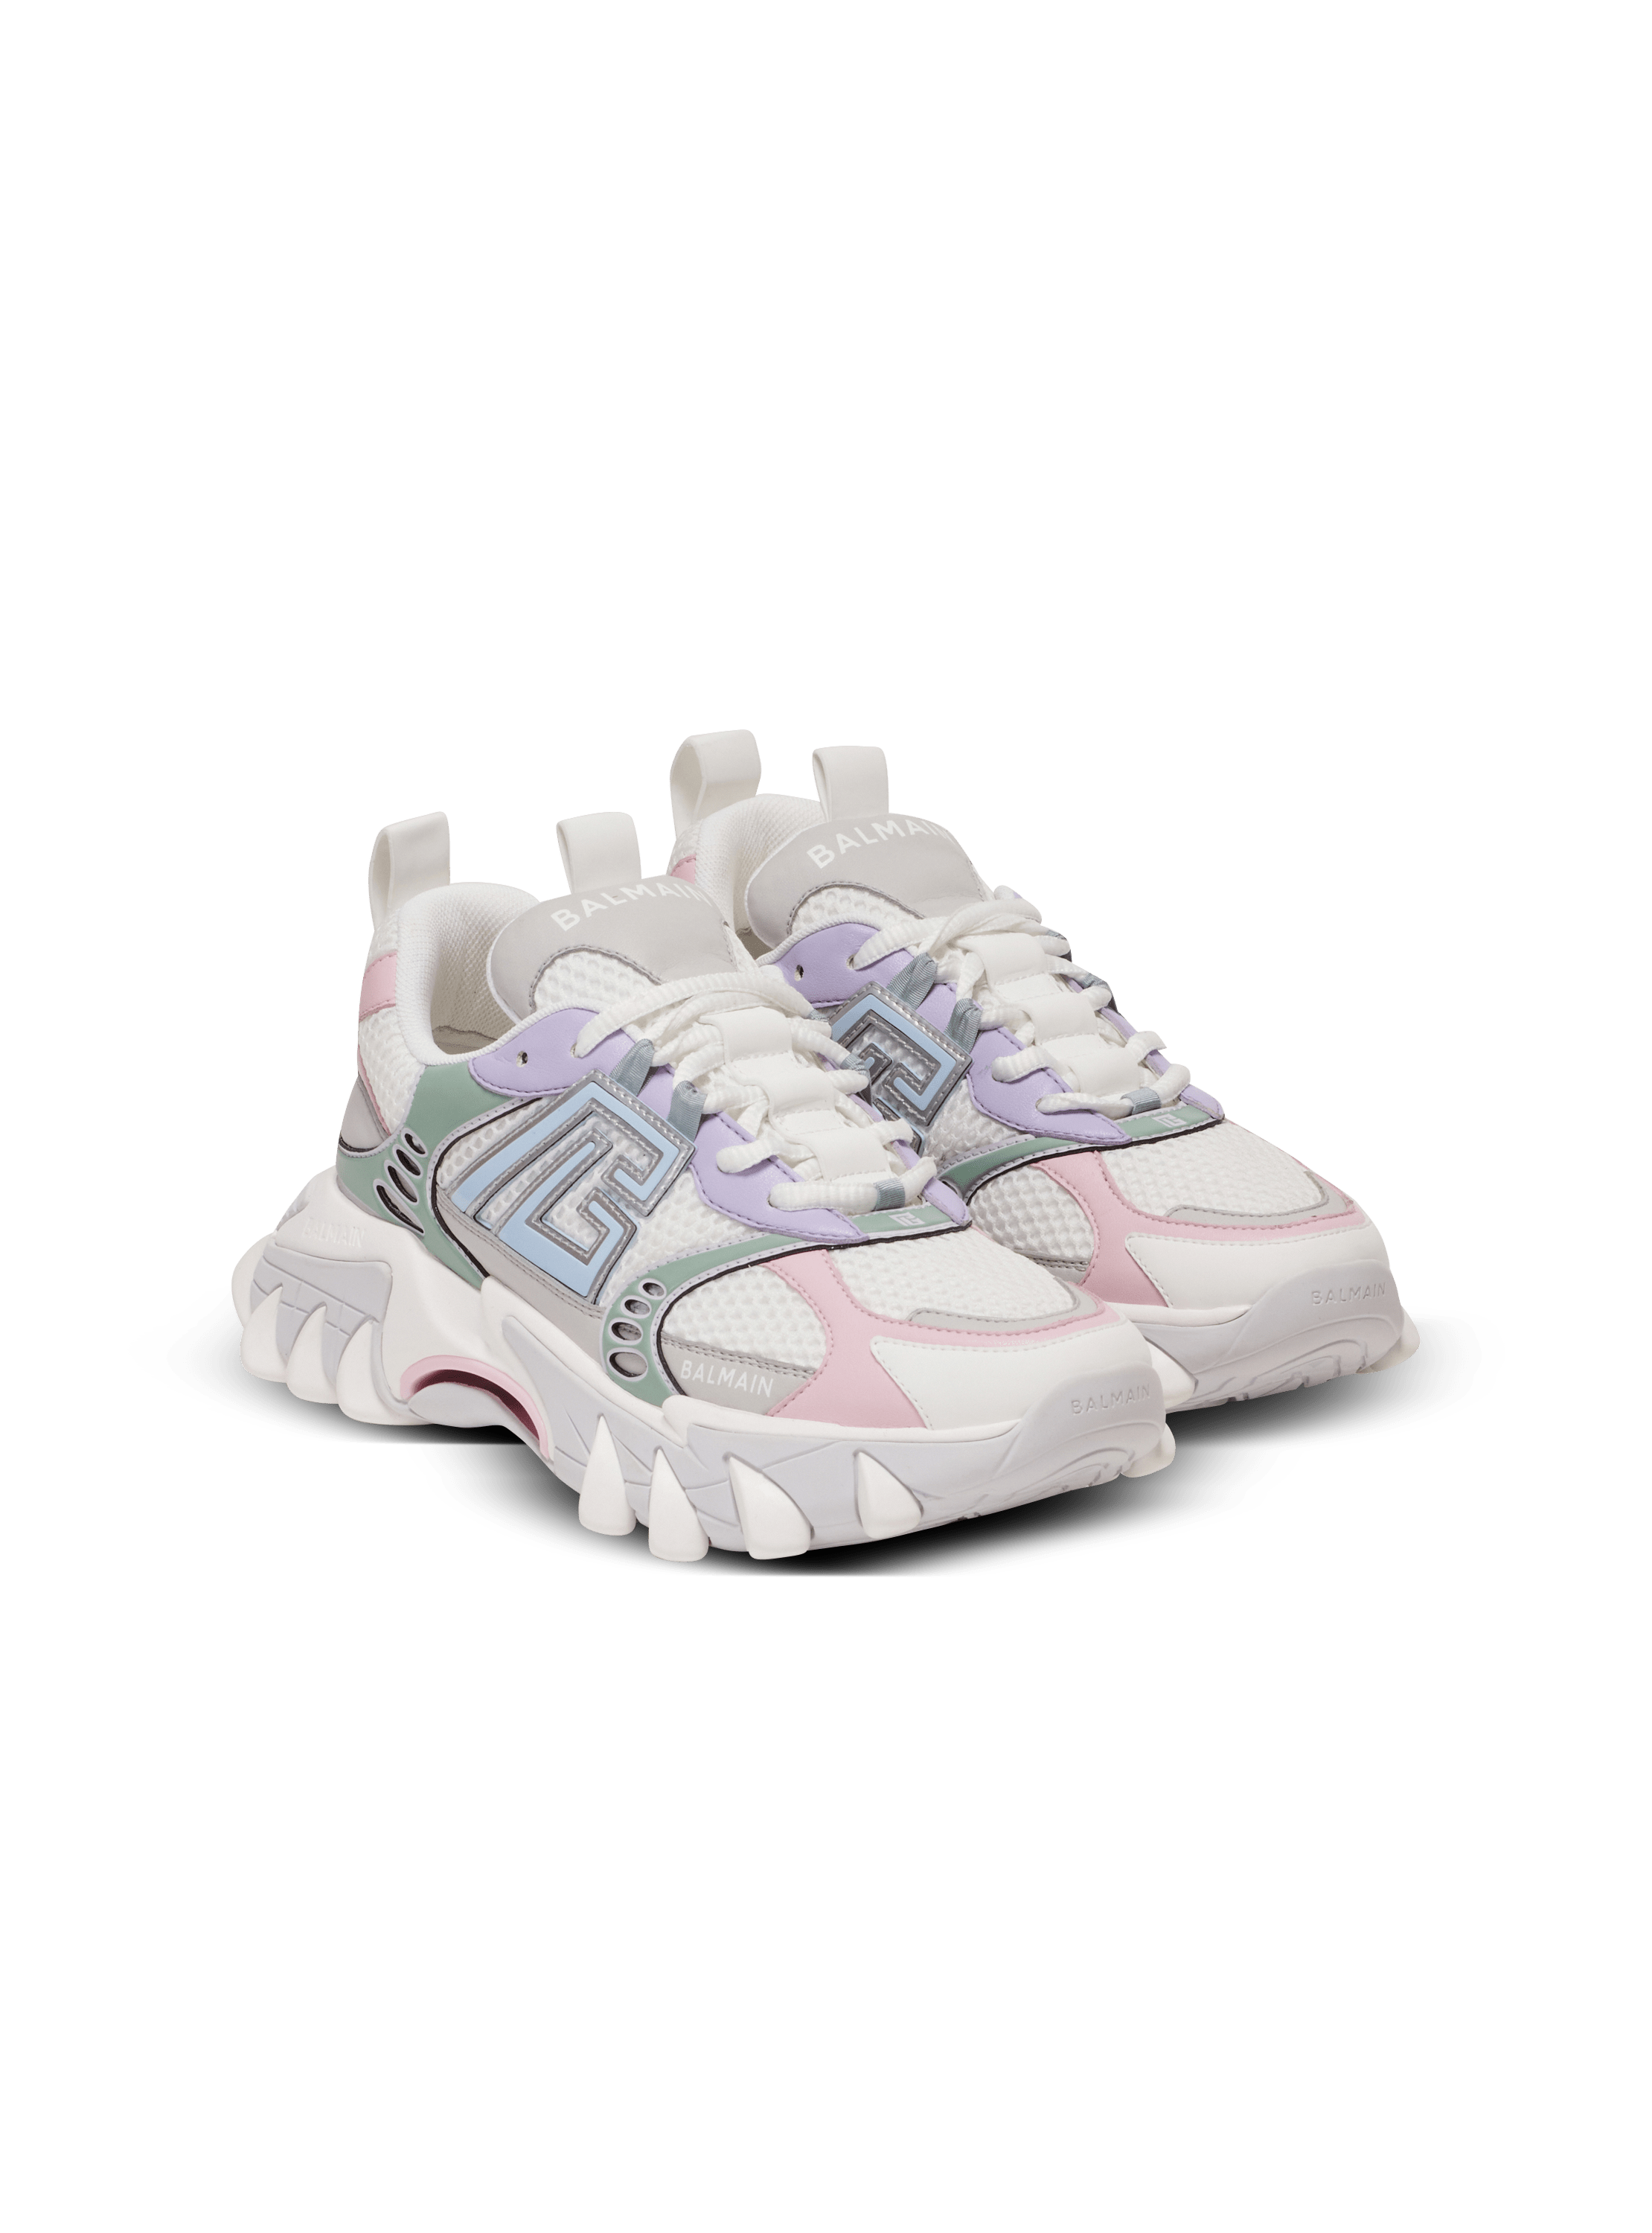 B-East PB sneakers in technical materials and mesh